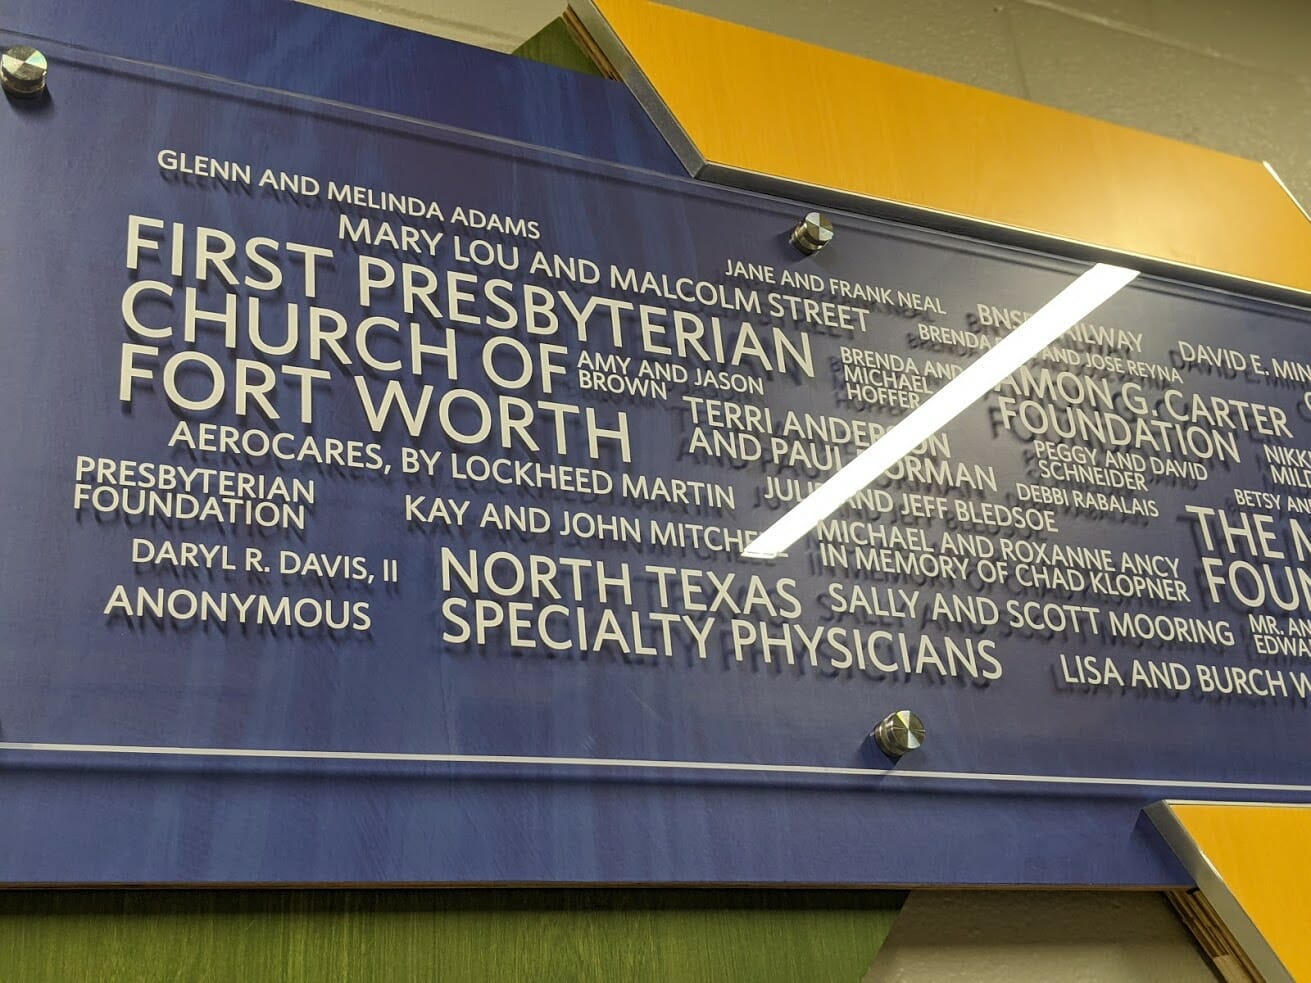 Karl Travis Men's Shelter Donor wall